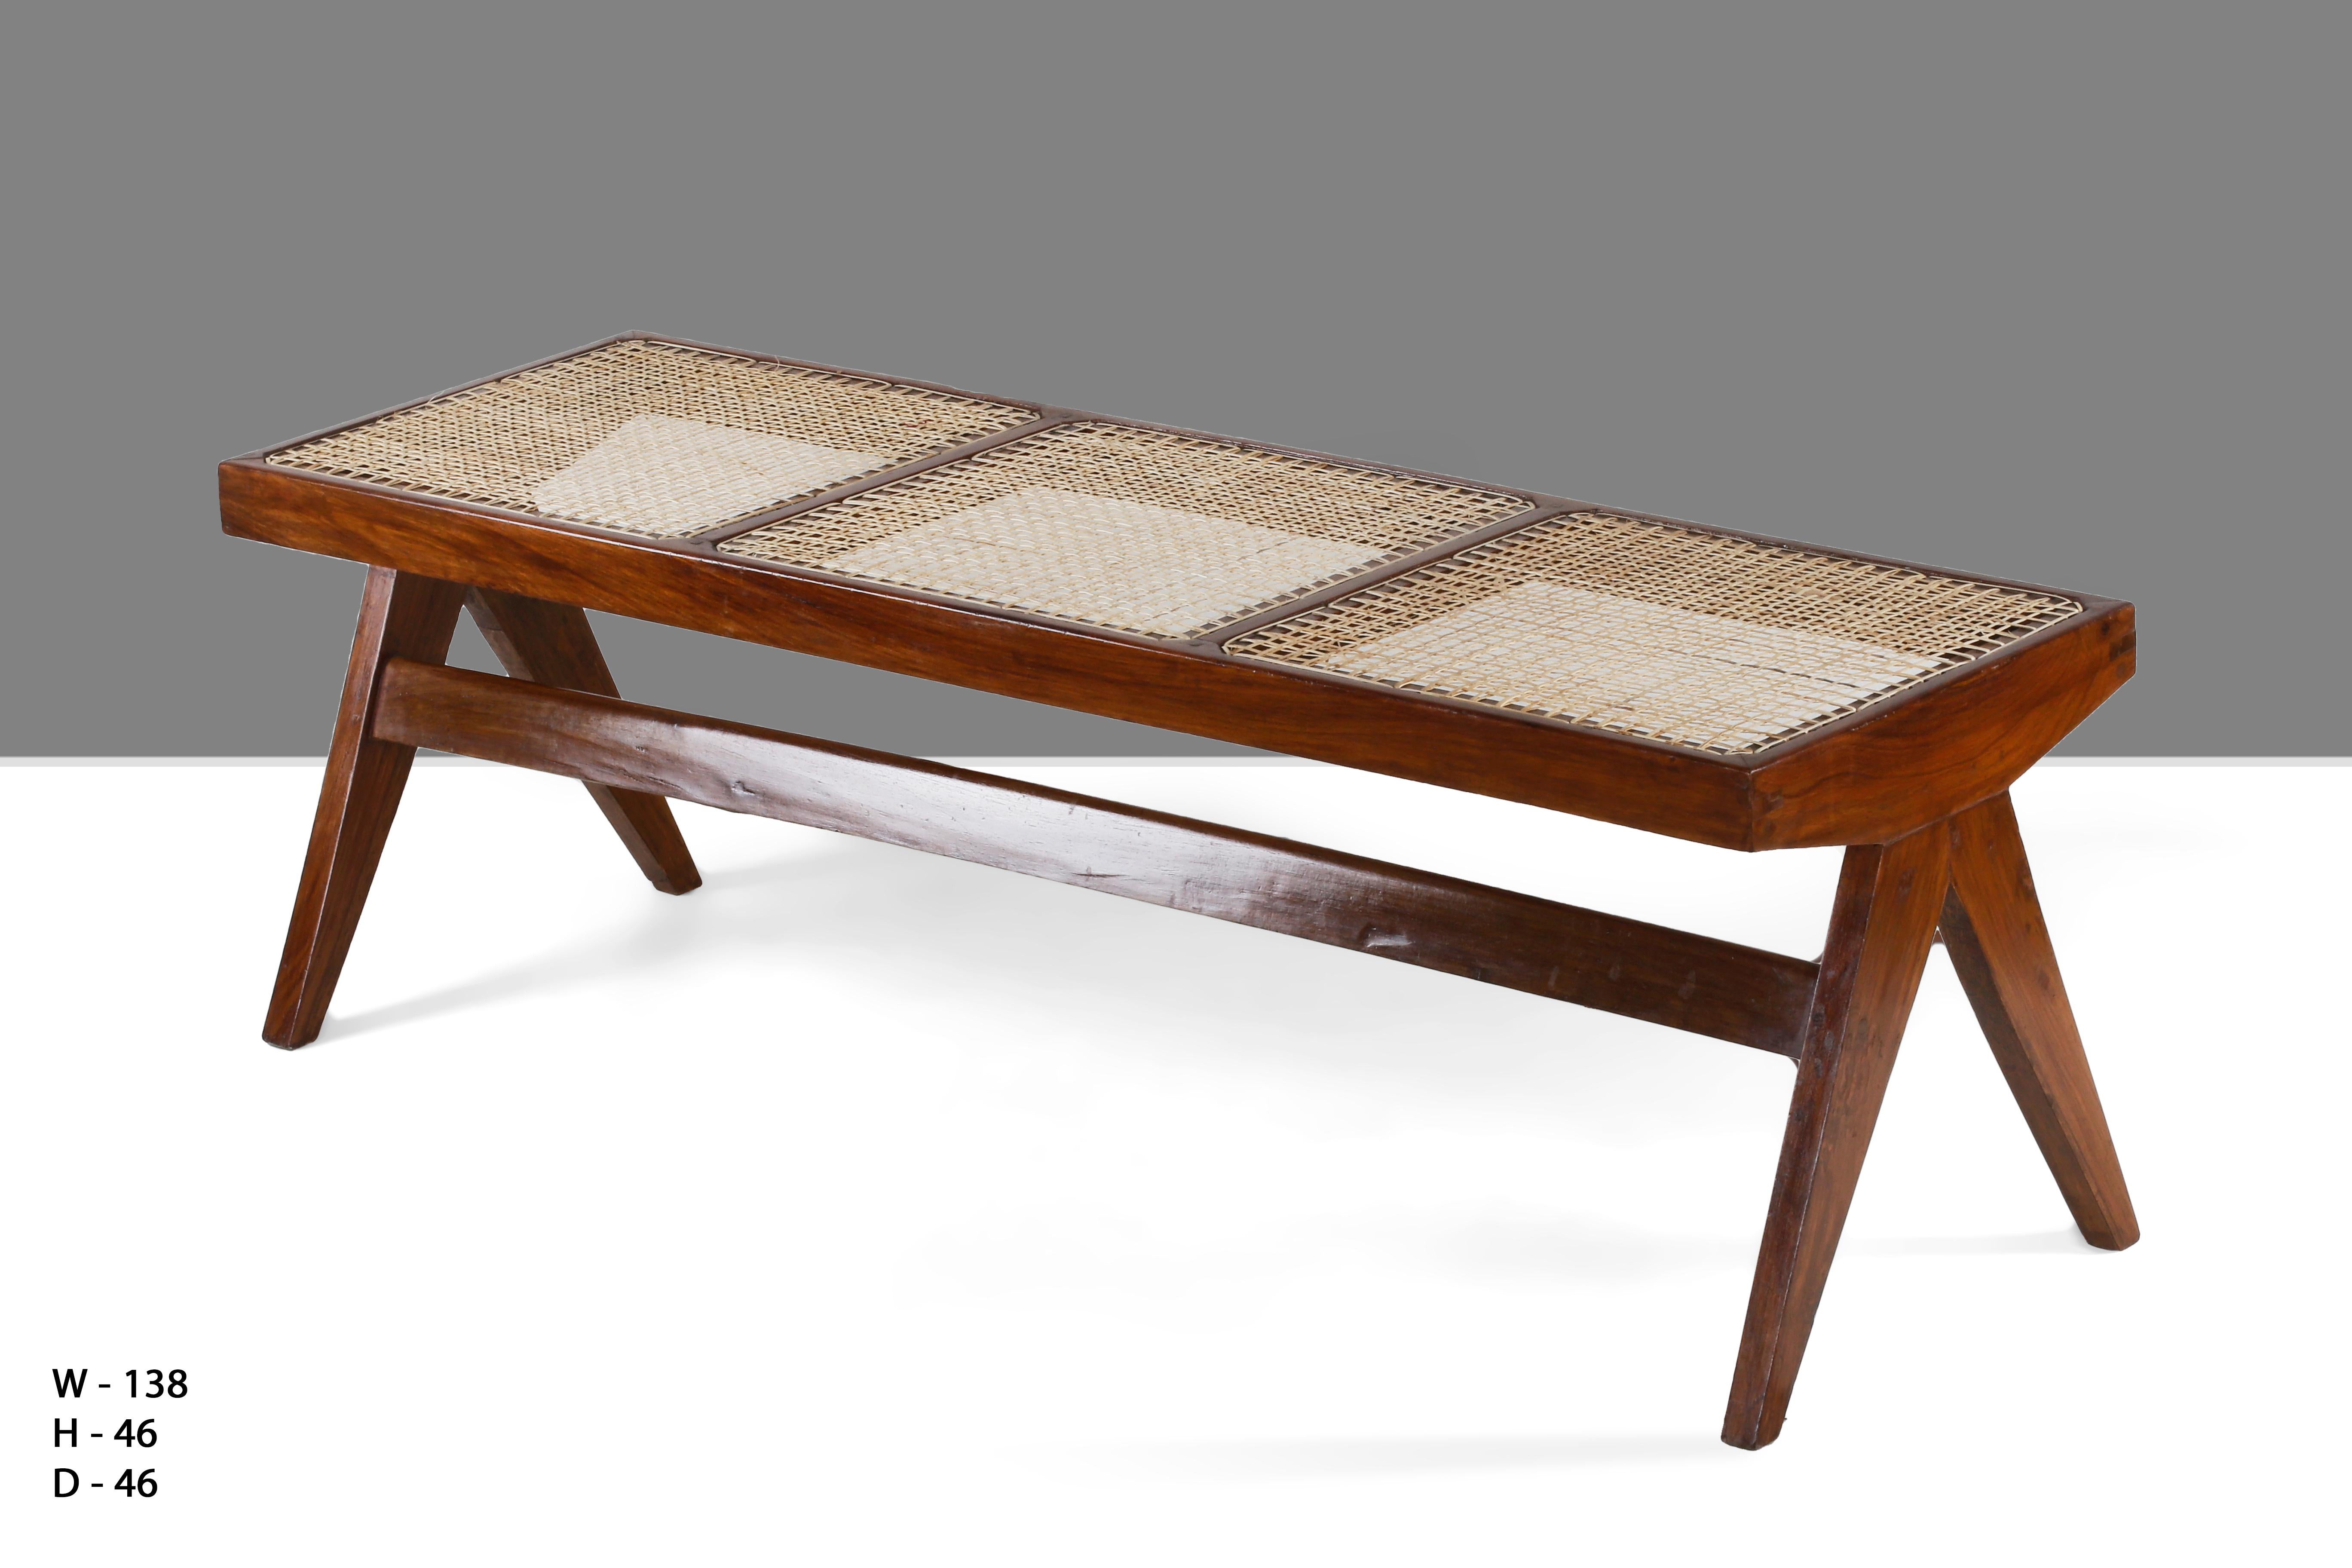 Indian Pierre Jeanneret, Rare Chandigarh Caned Bench, PJ-SI-33-C